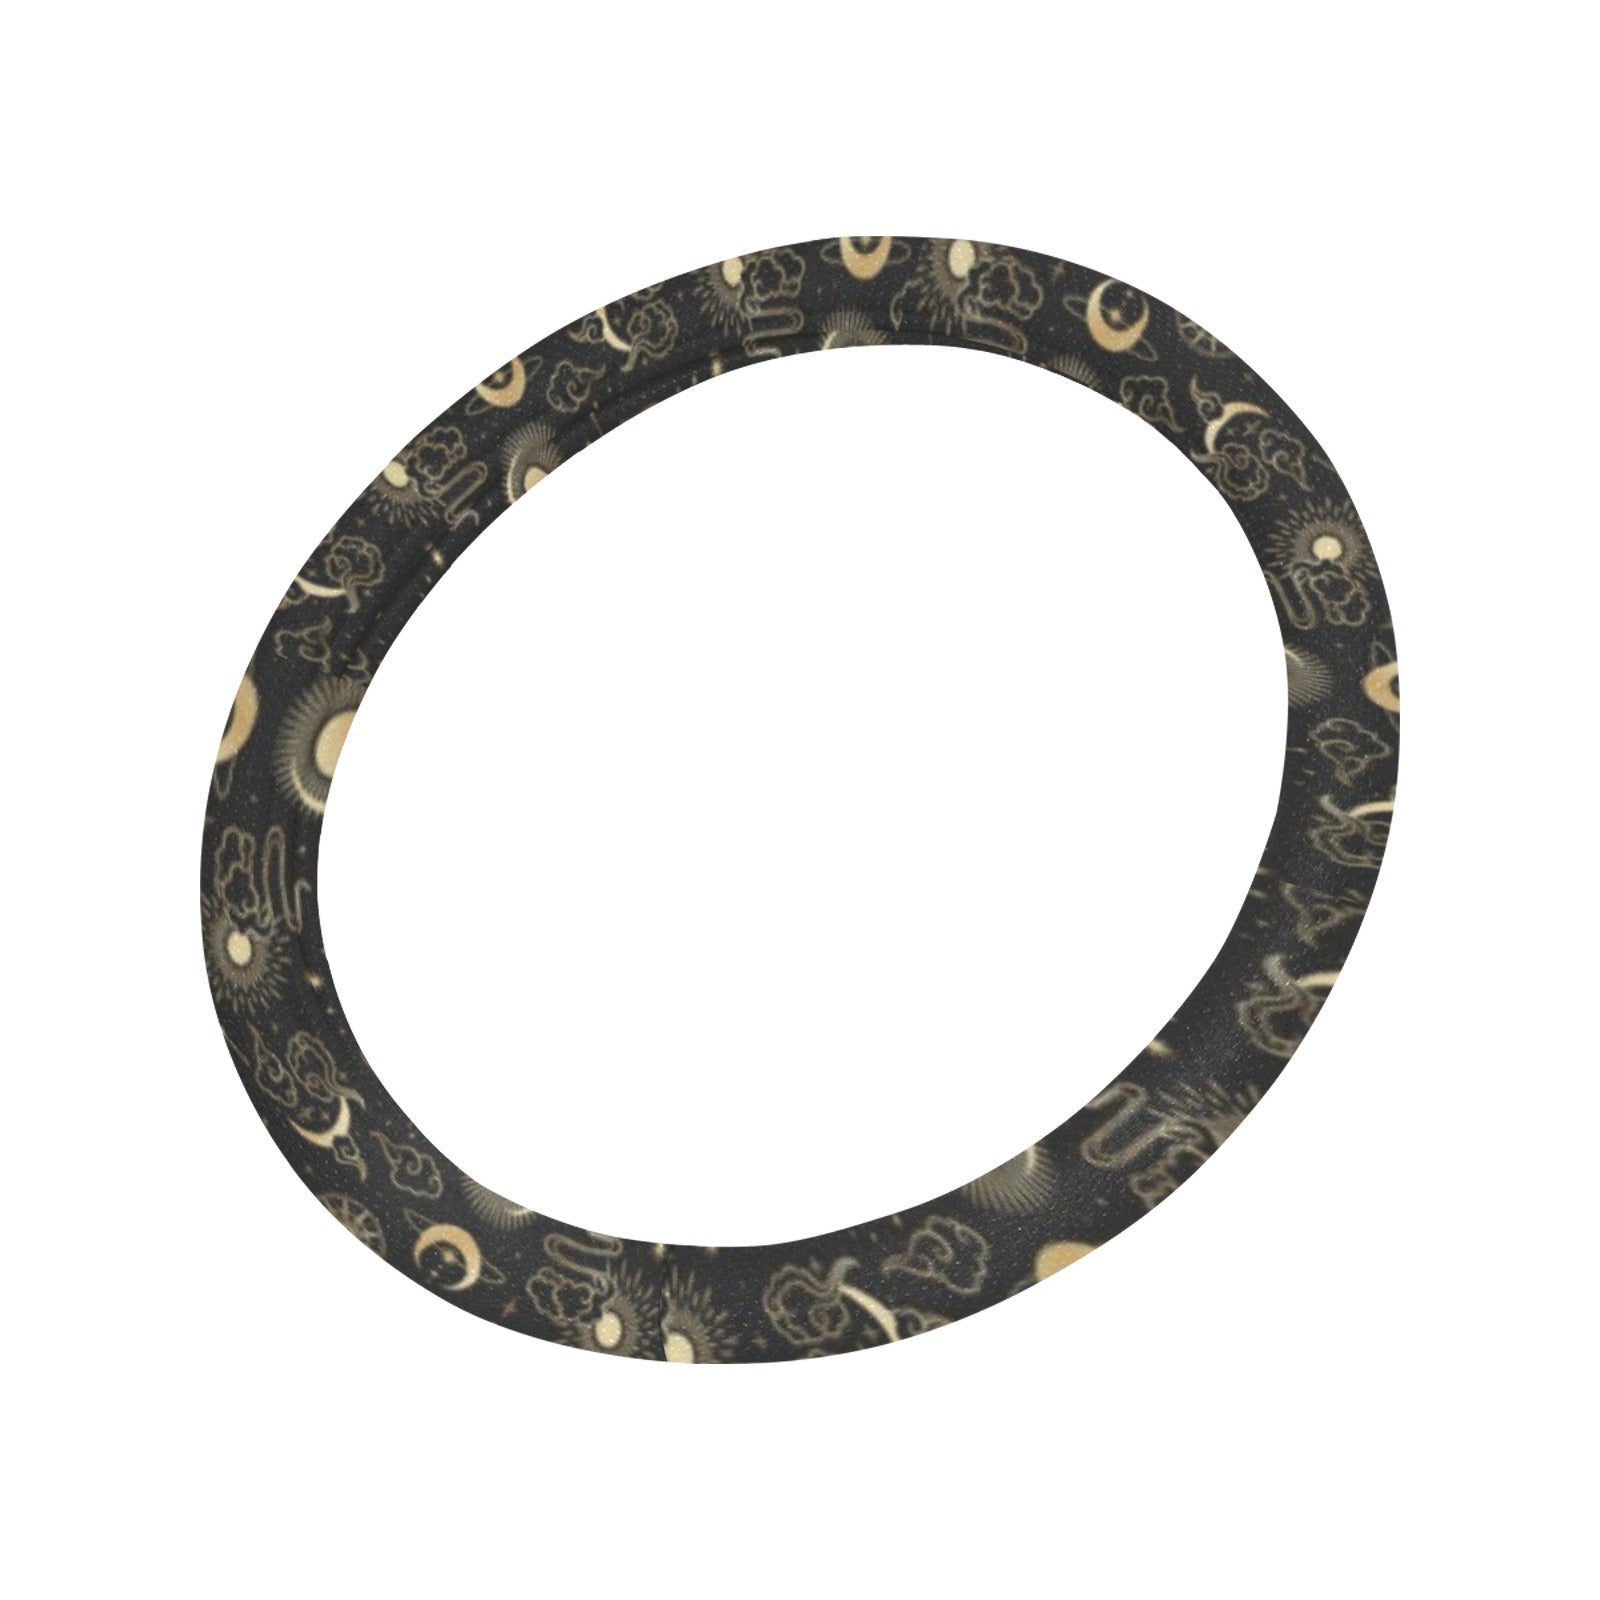 Free: LOUIS VUITTON car steering wheel cover - Accessories